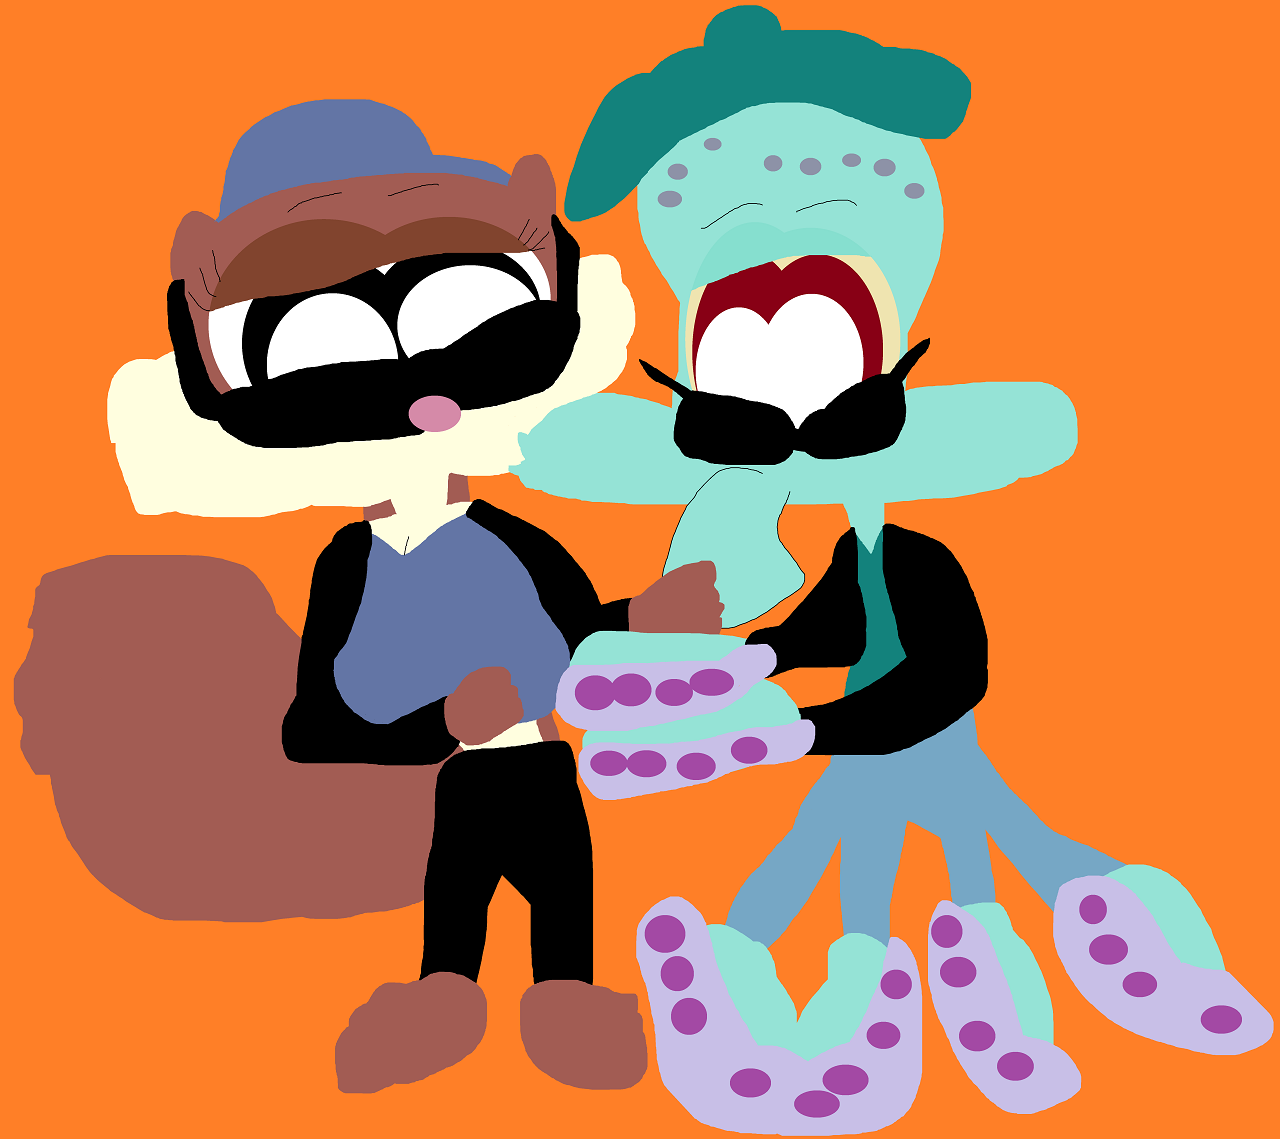 Squidward And Sandy In Cool Duds Kissing by Falconlobo